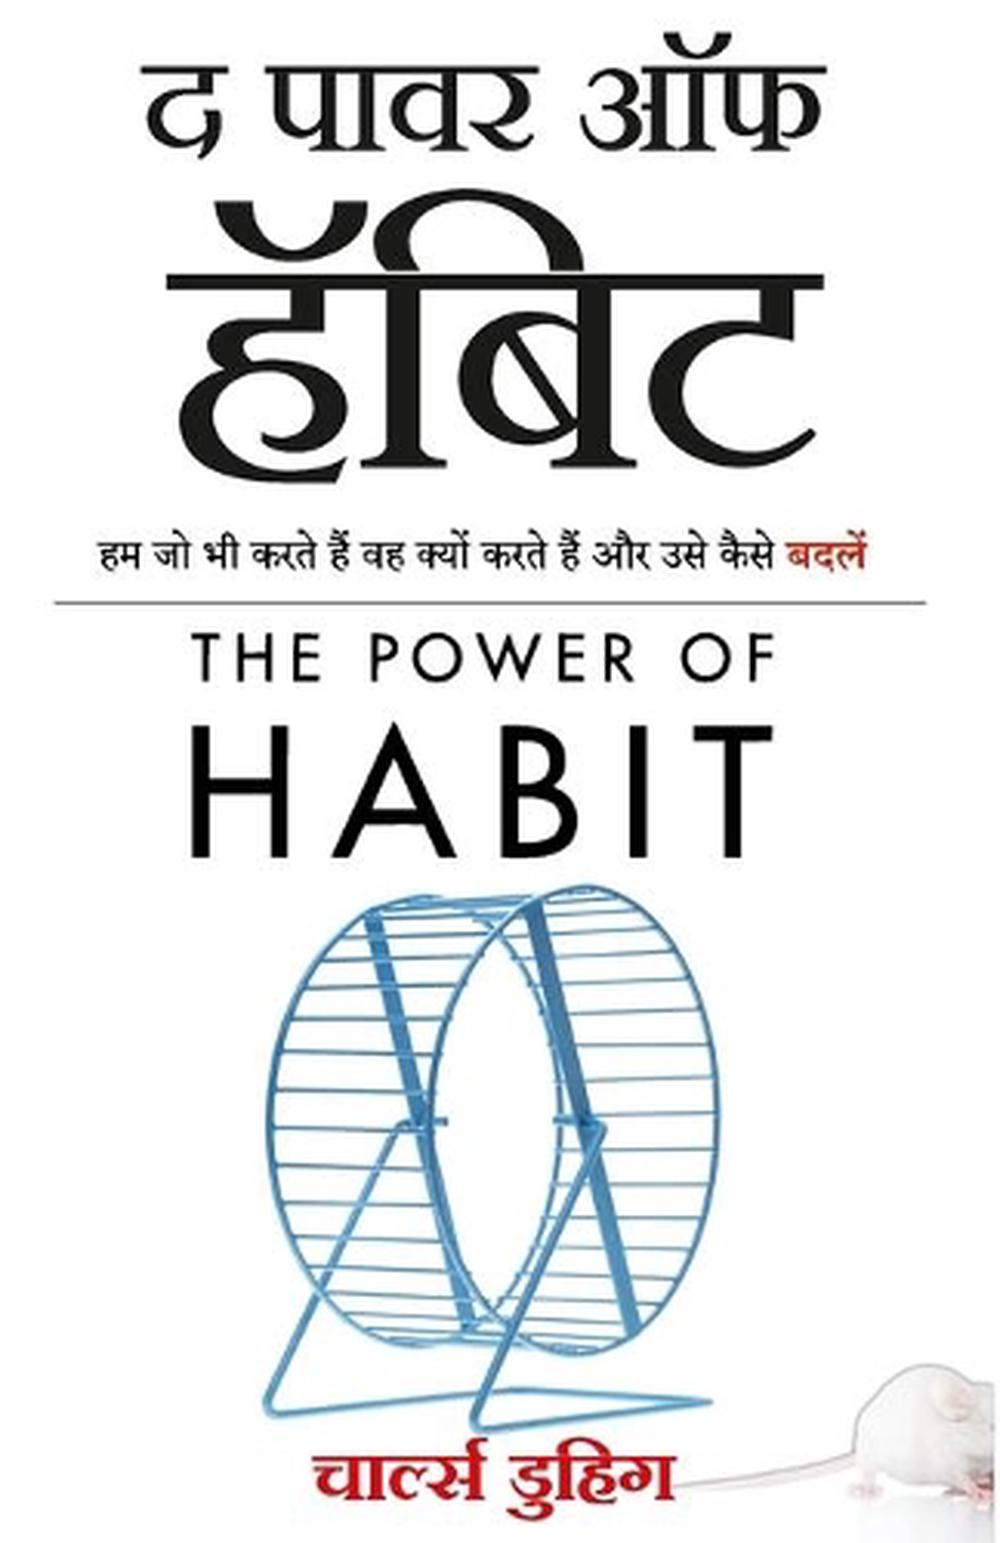 the power of habit by charles duhigg book review